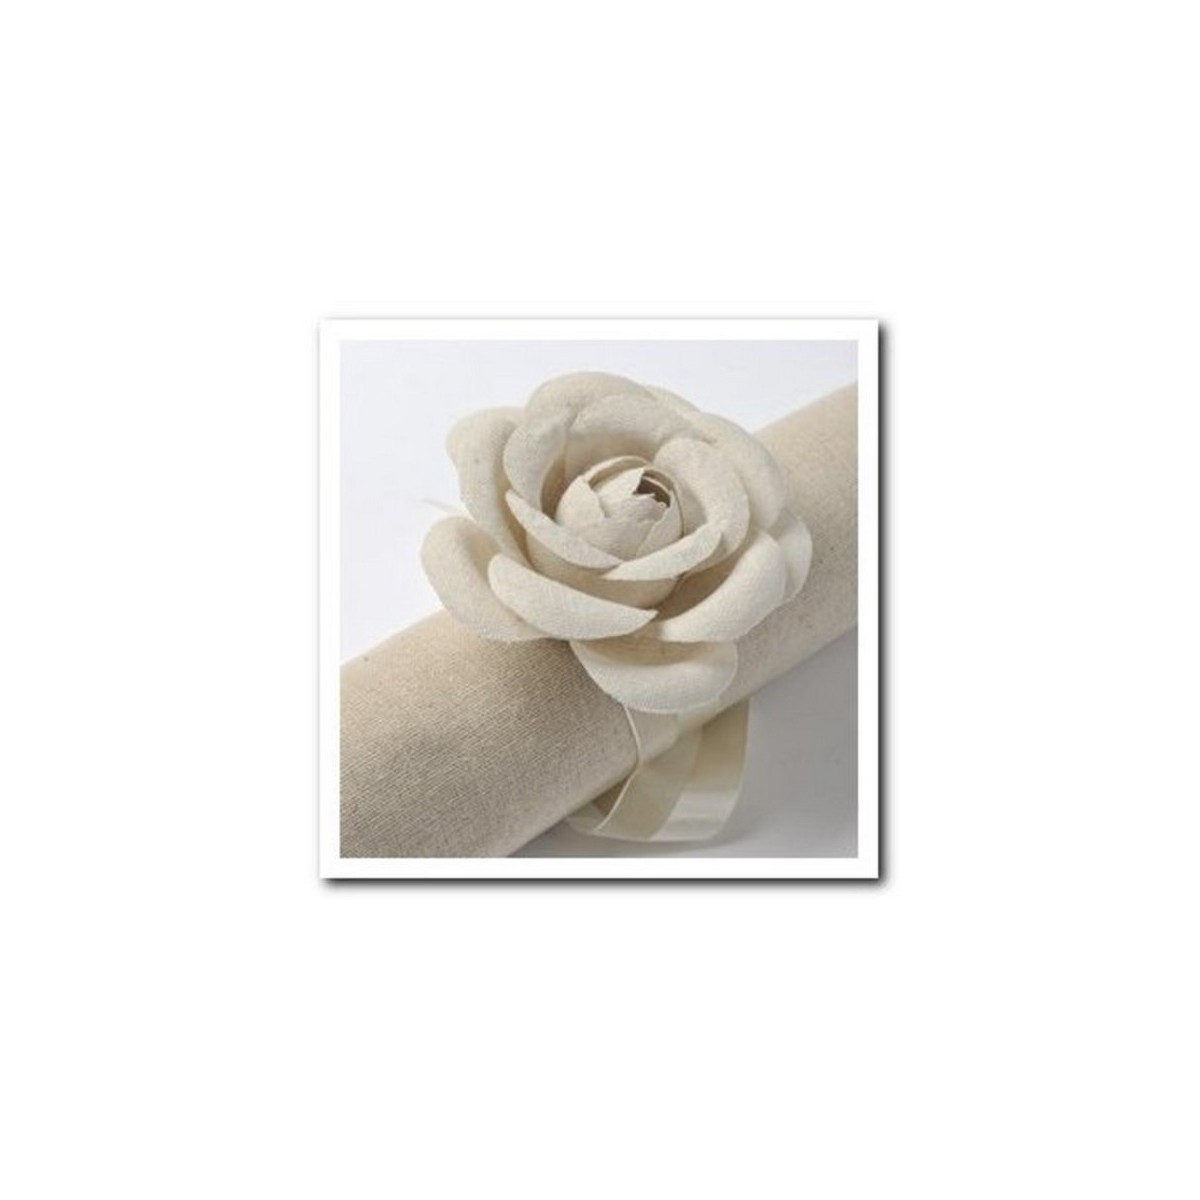 roses lin decoration mariage